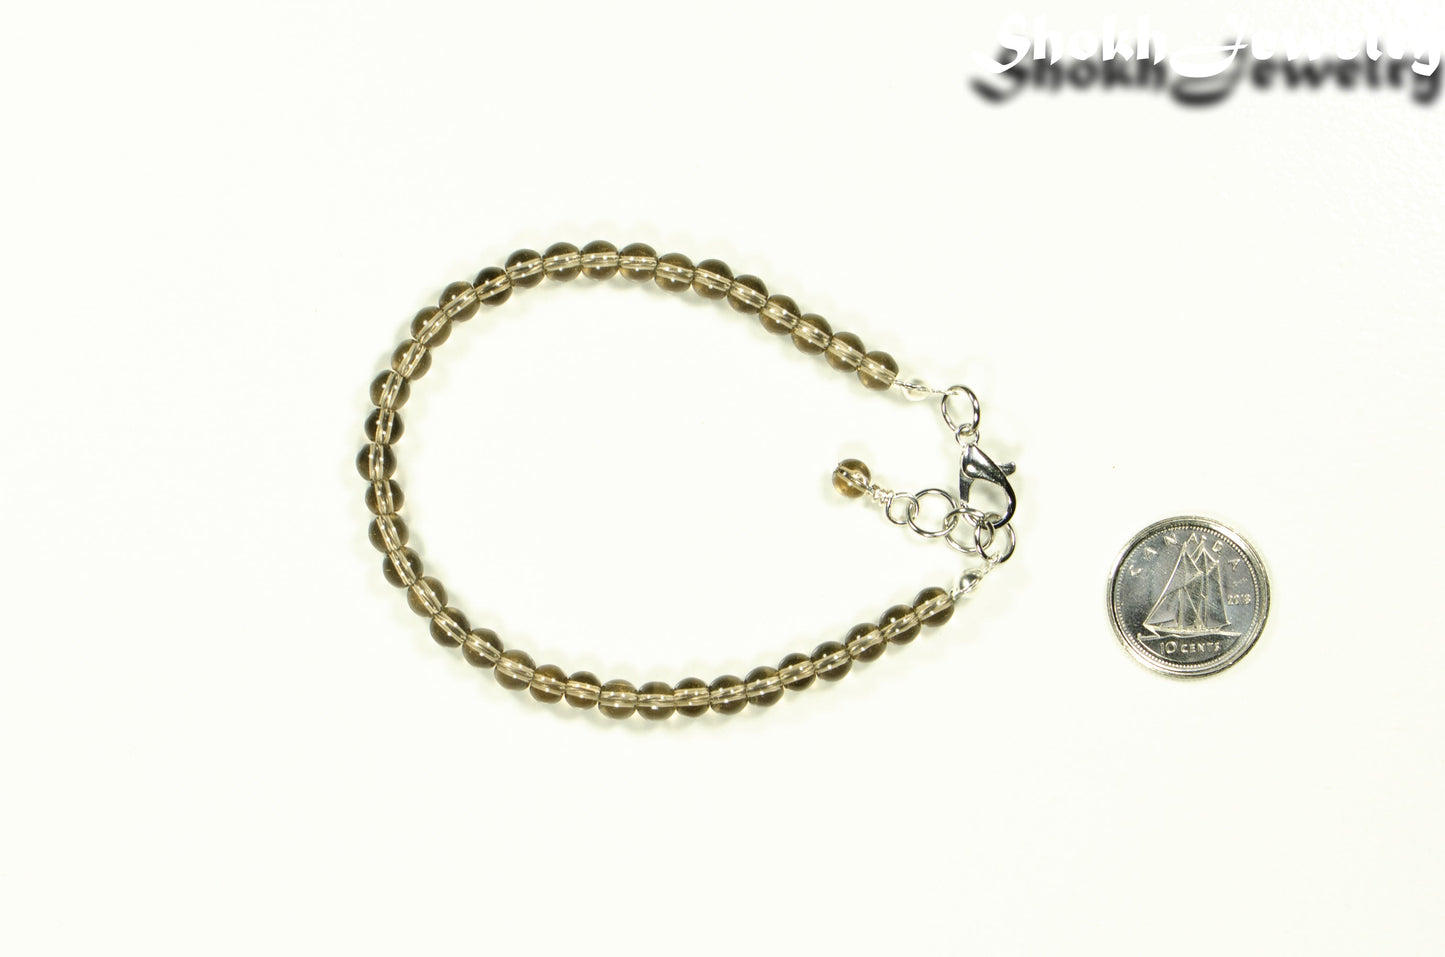 4mm Smoky Quartz anklet with Clasp beside a dime.